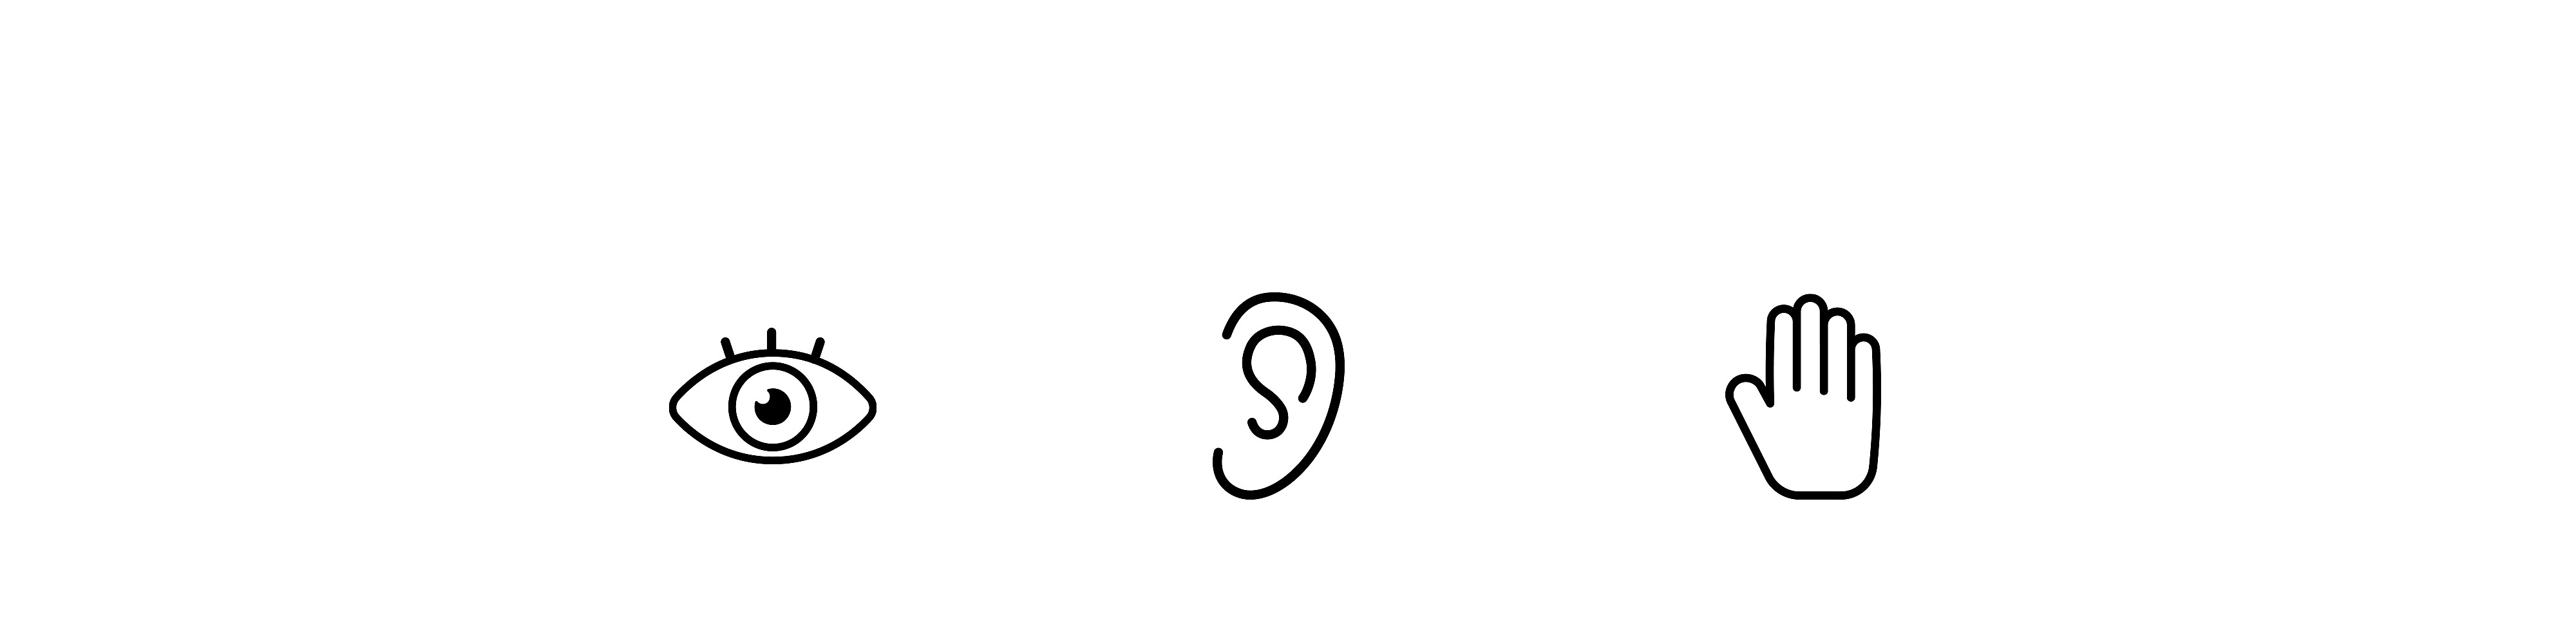 Three icons next to each other, on the left an eye, in the middle an ear and on the right a hand